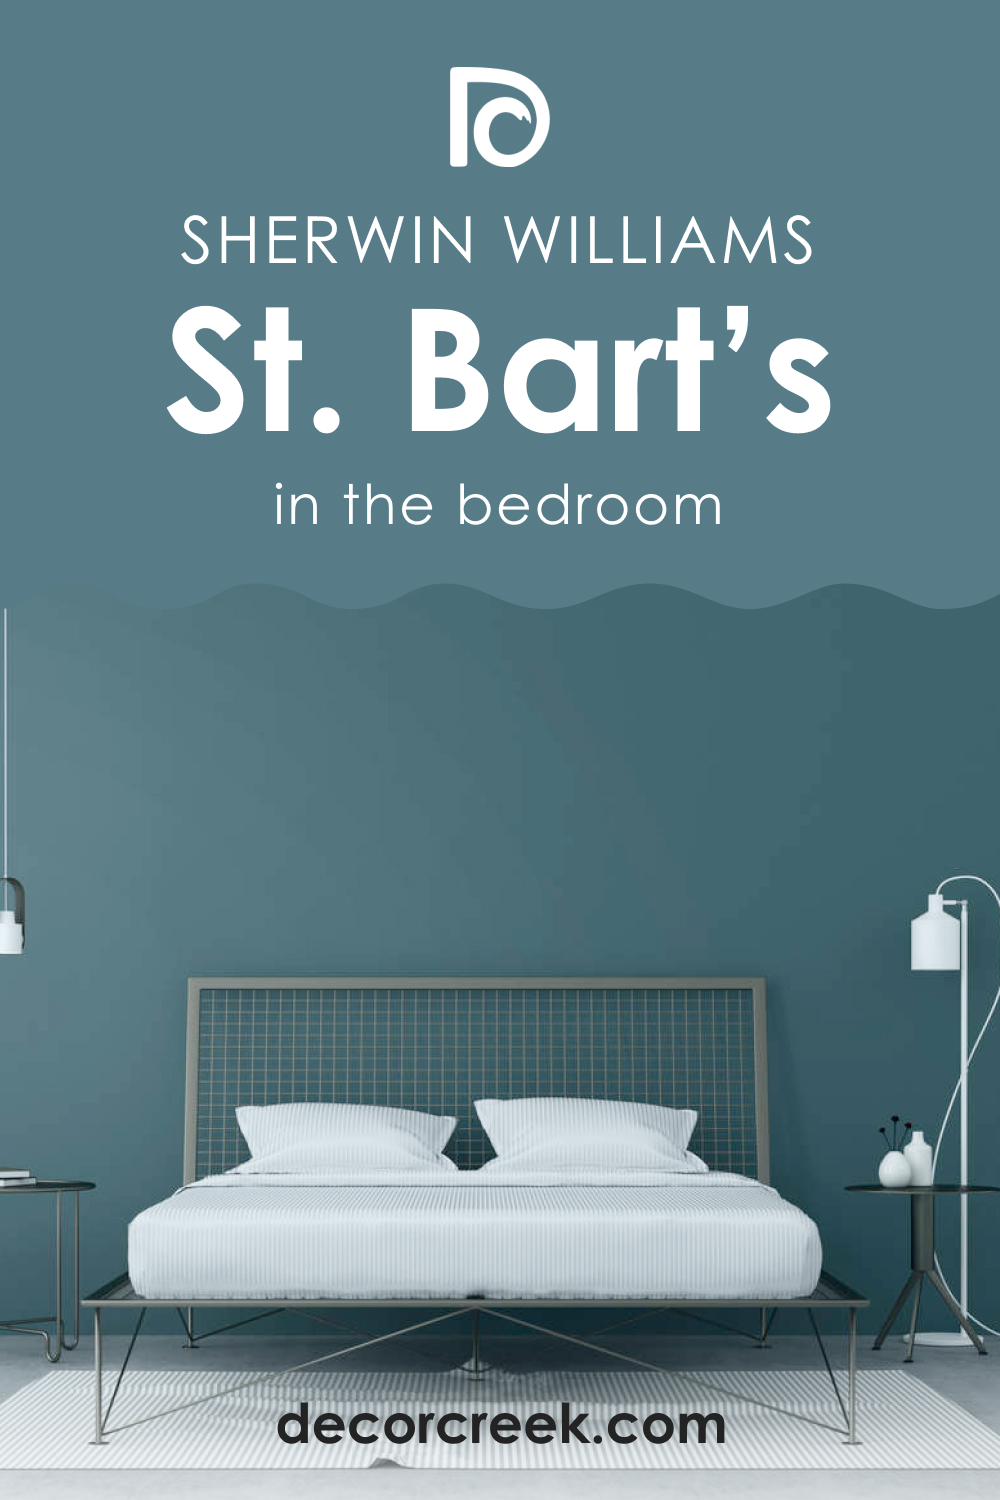 How to Use SW 7614 St. Bart’s in the Bedroom?